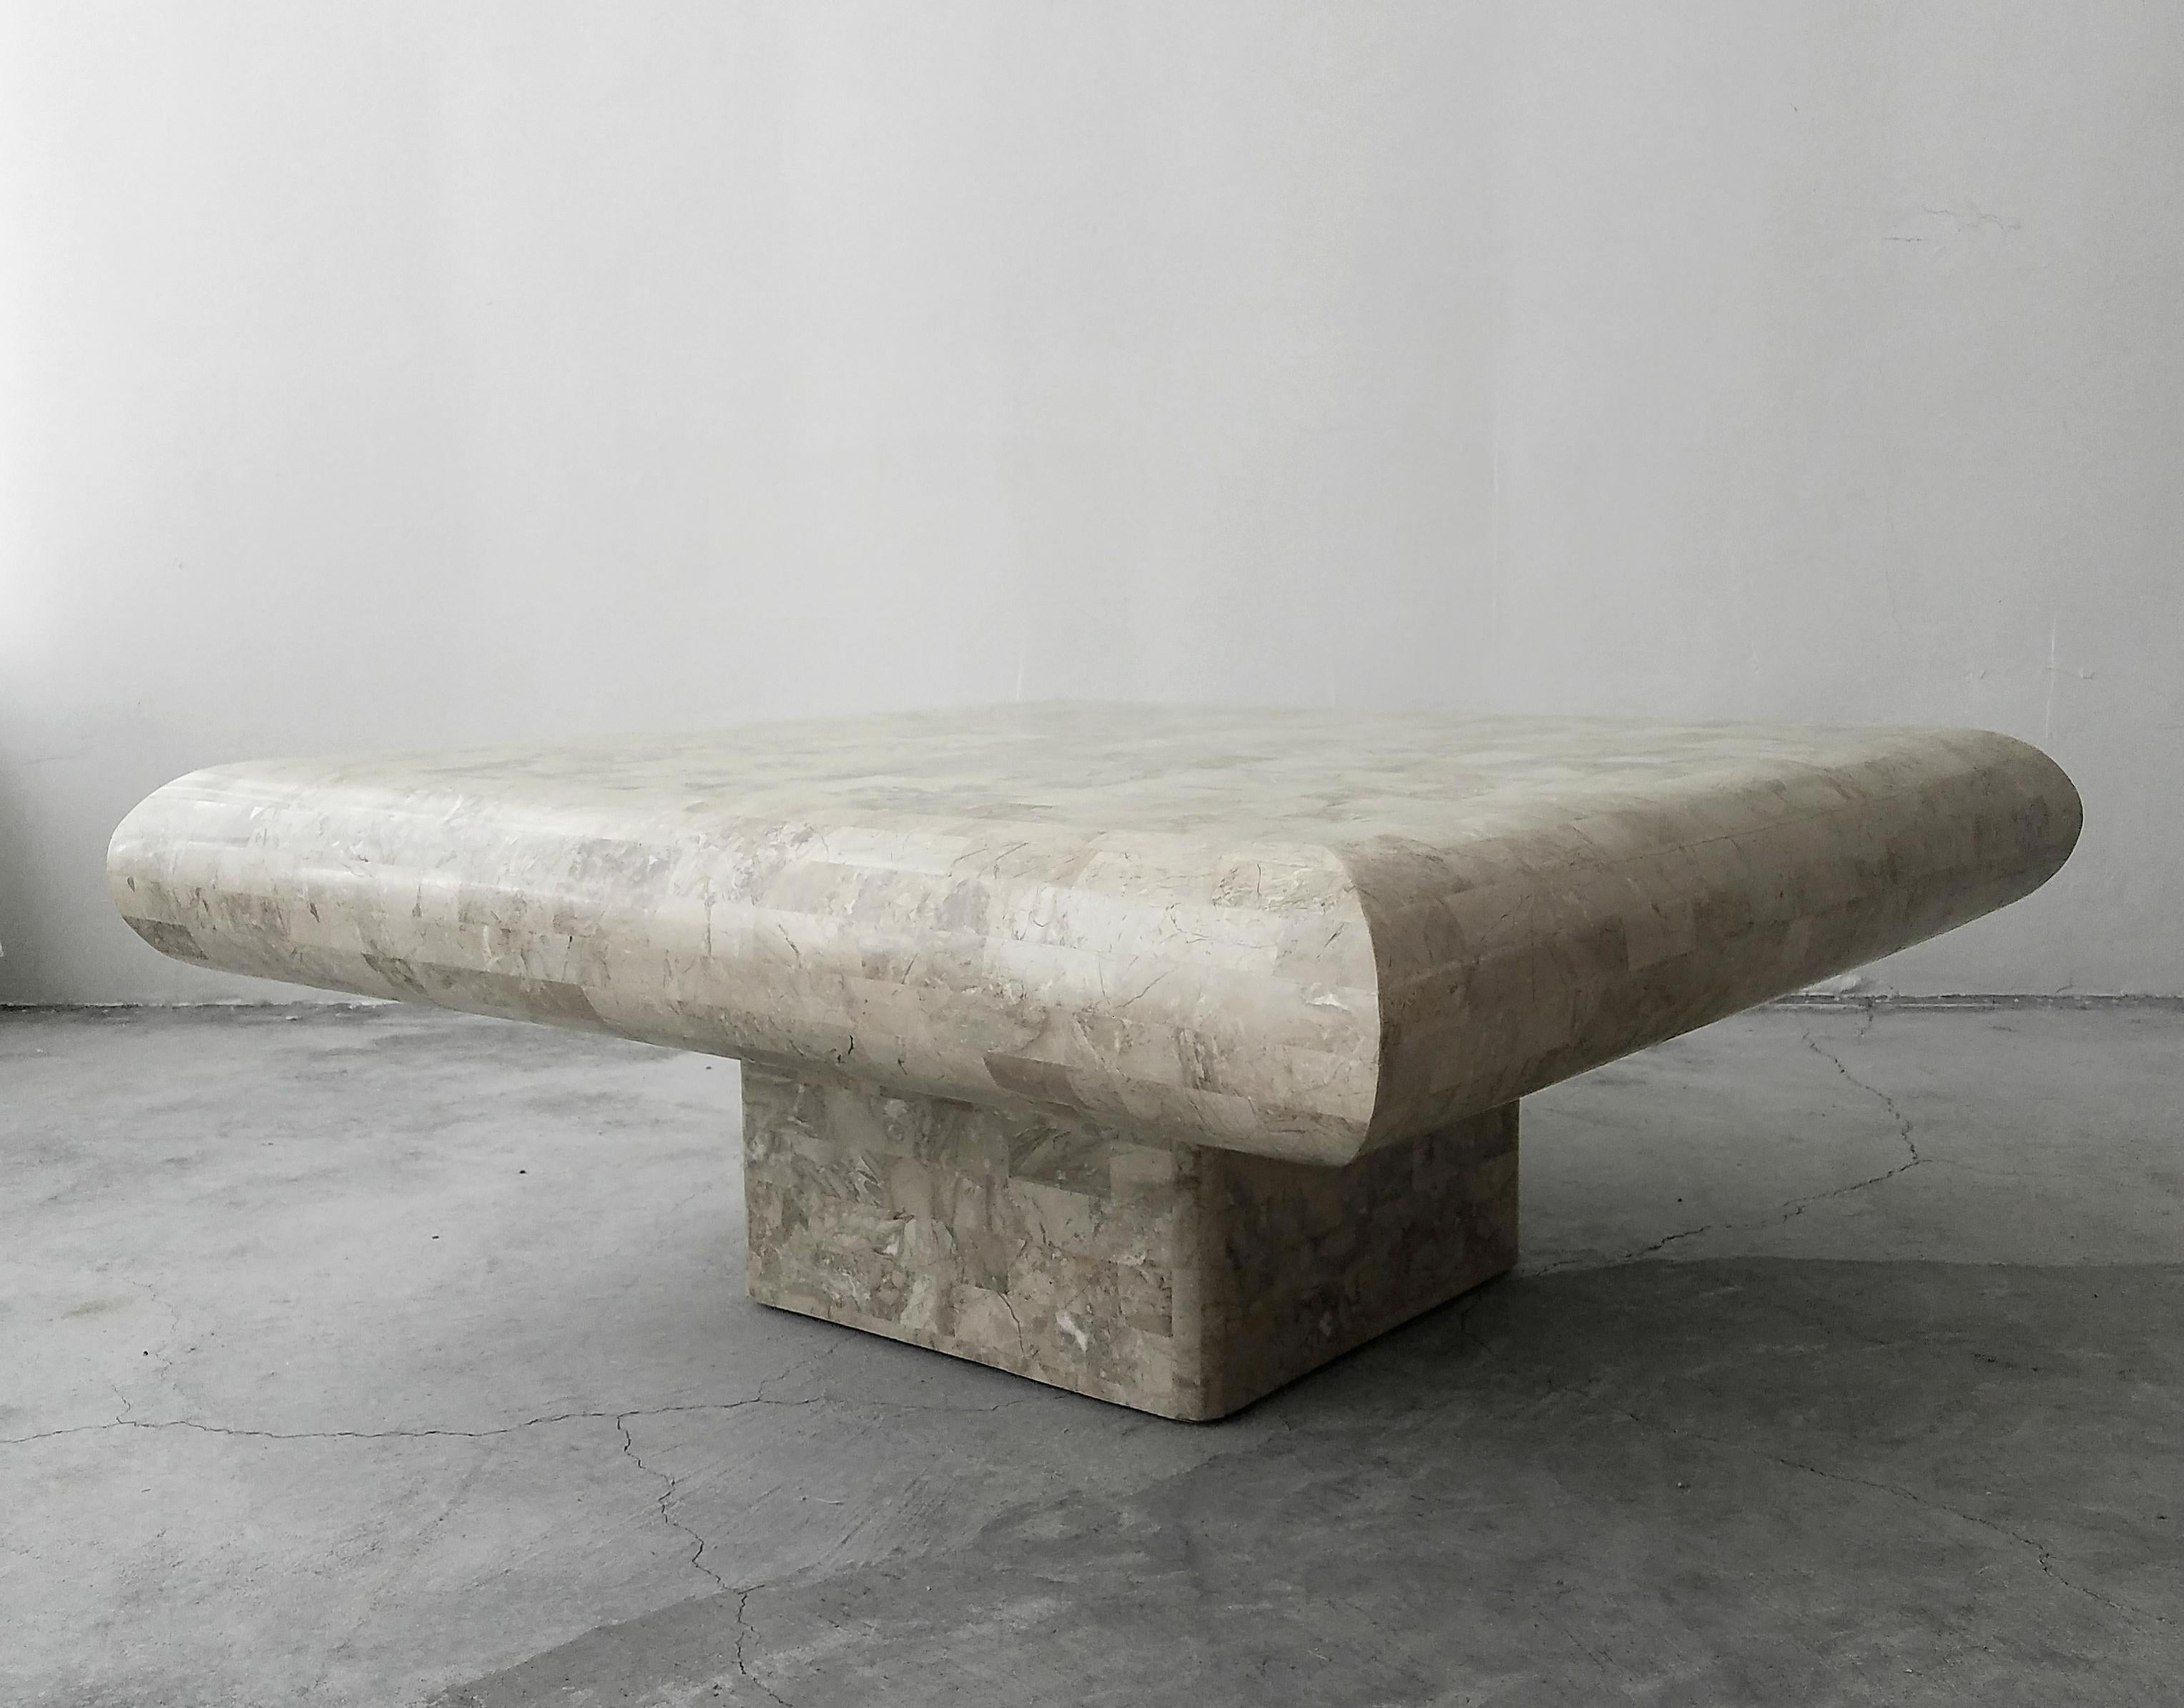 Unique tessellated stone pedestal coffee table by Maitland-Smith. Clean, simple, organic design.

Table is in excellent condition.